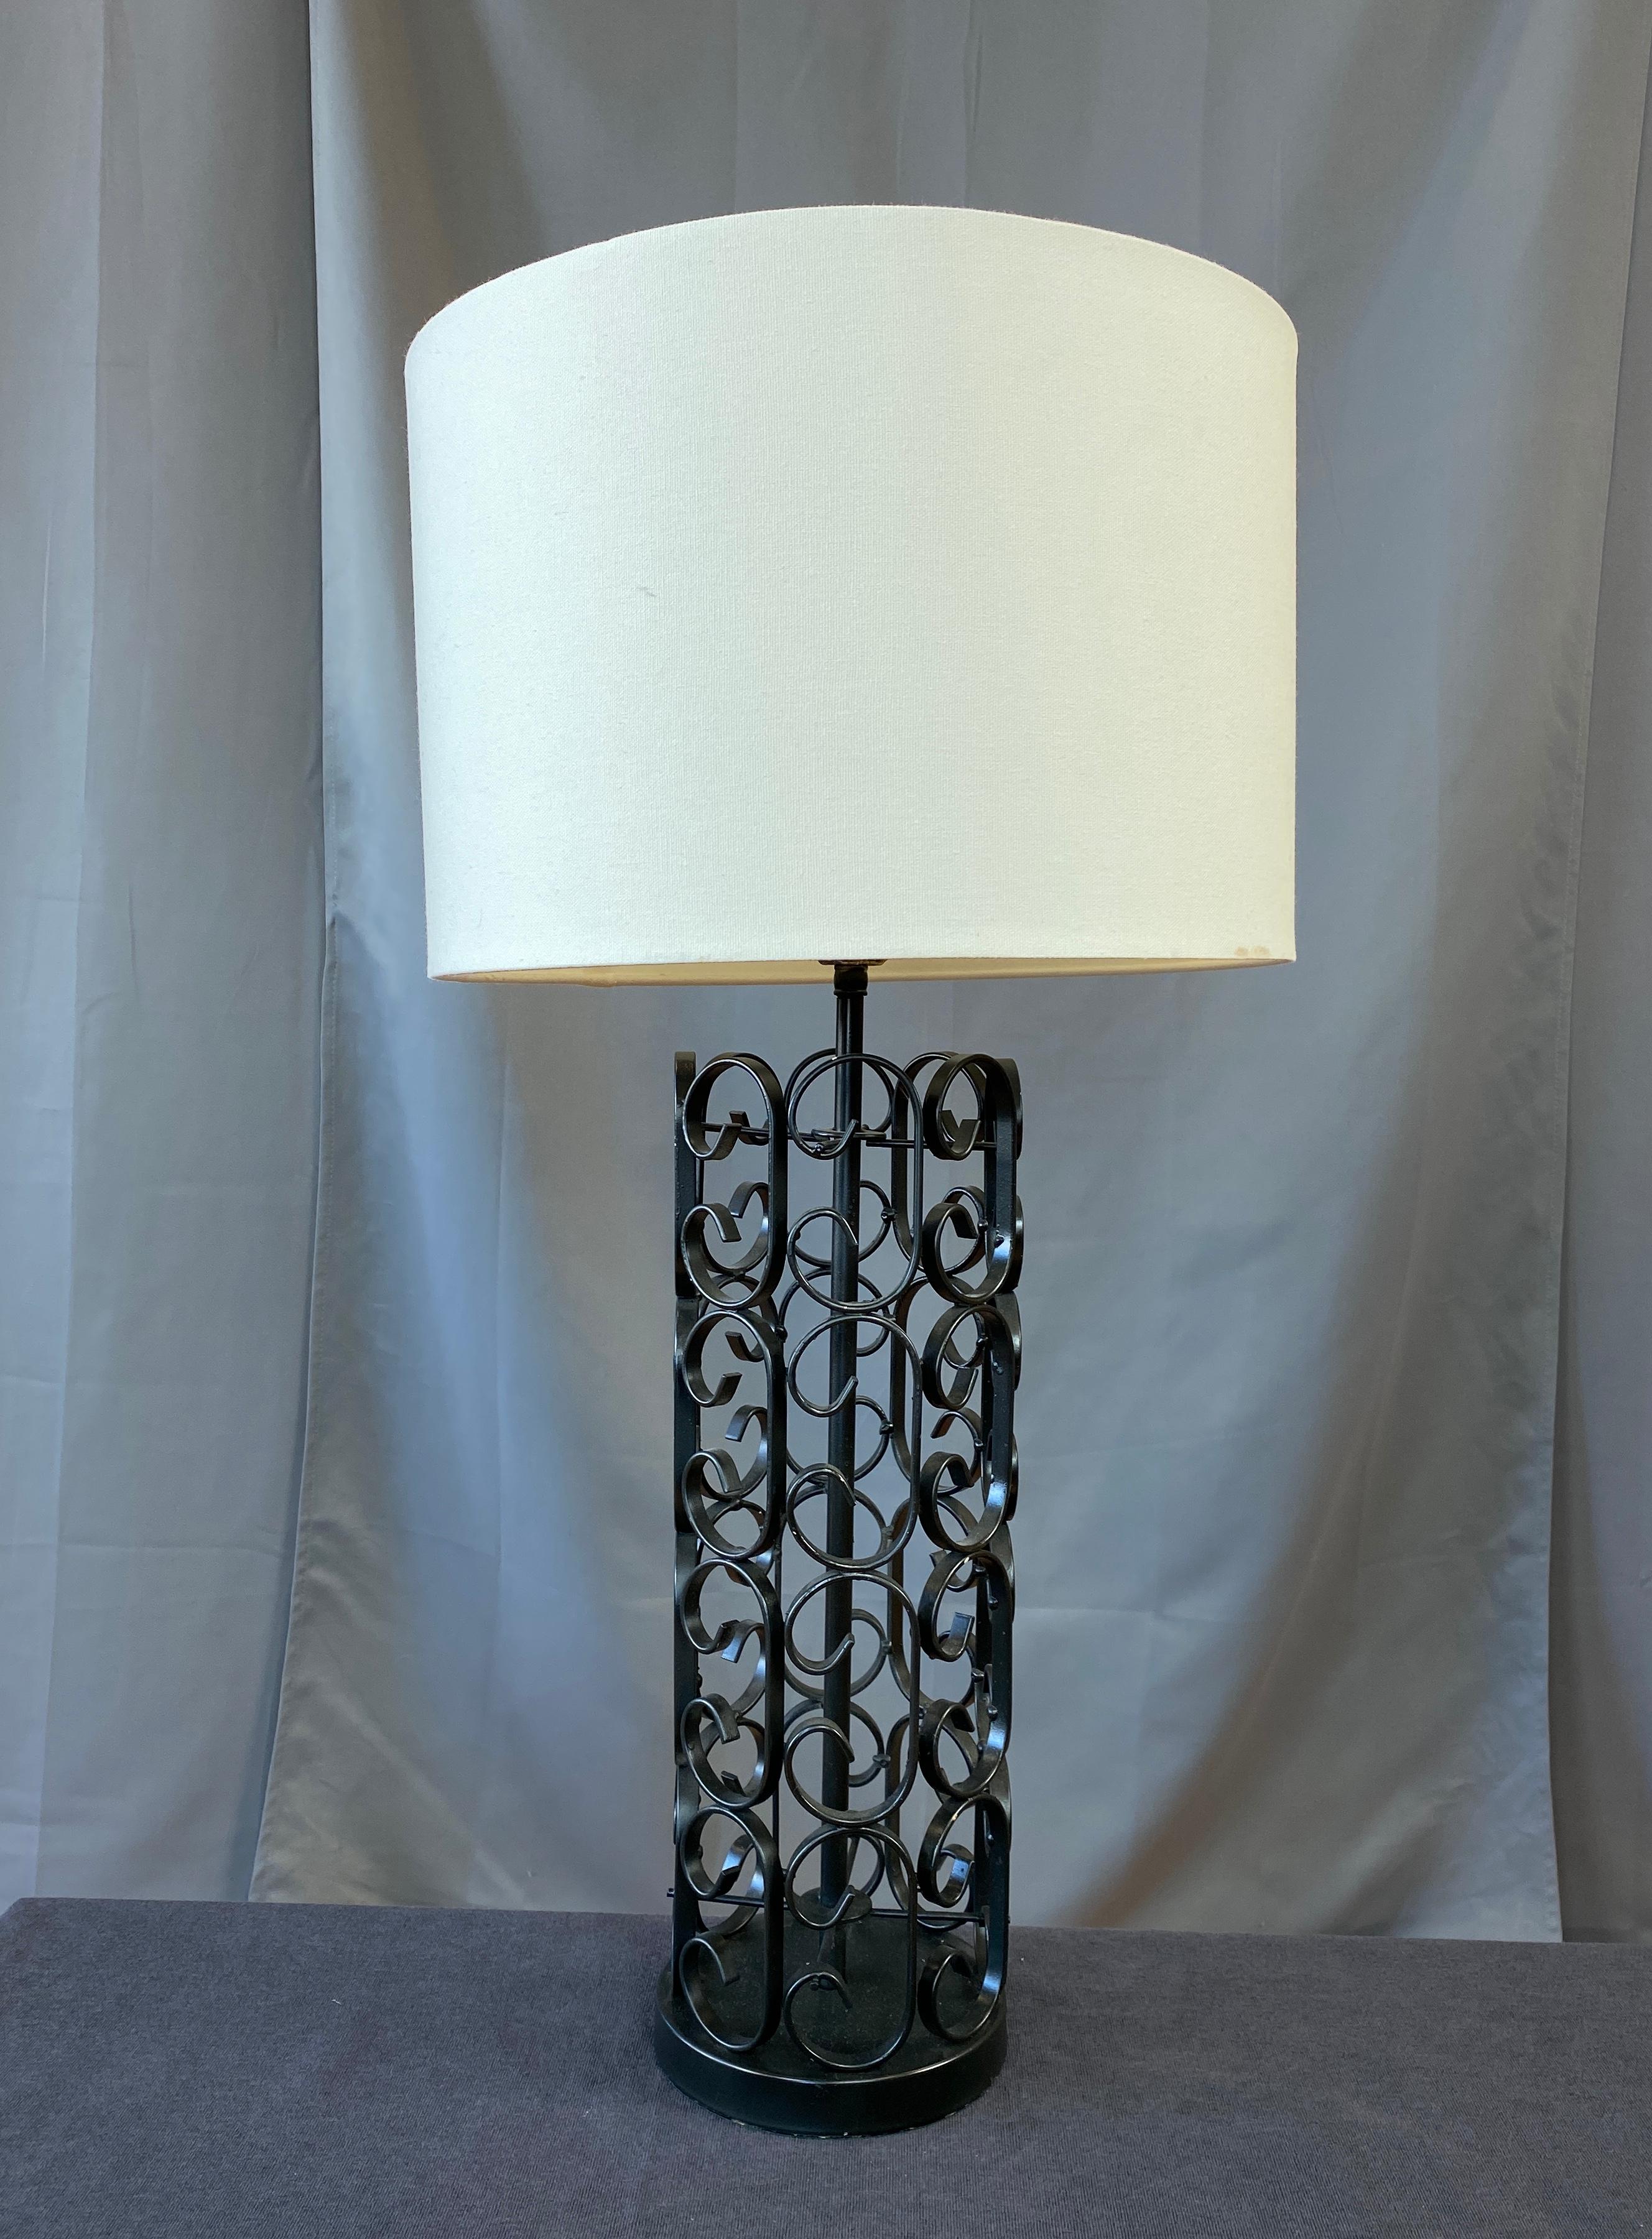 Offered here is a Arthur Umanoff designed table lamp part of the Granada Collection for Boyeur Scott, circa 1960s
Lamp is 23 inches to the top of it's socket.